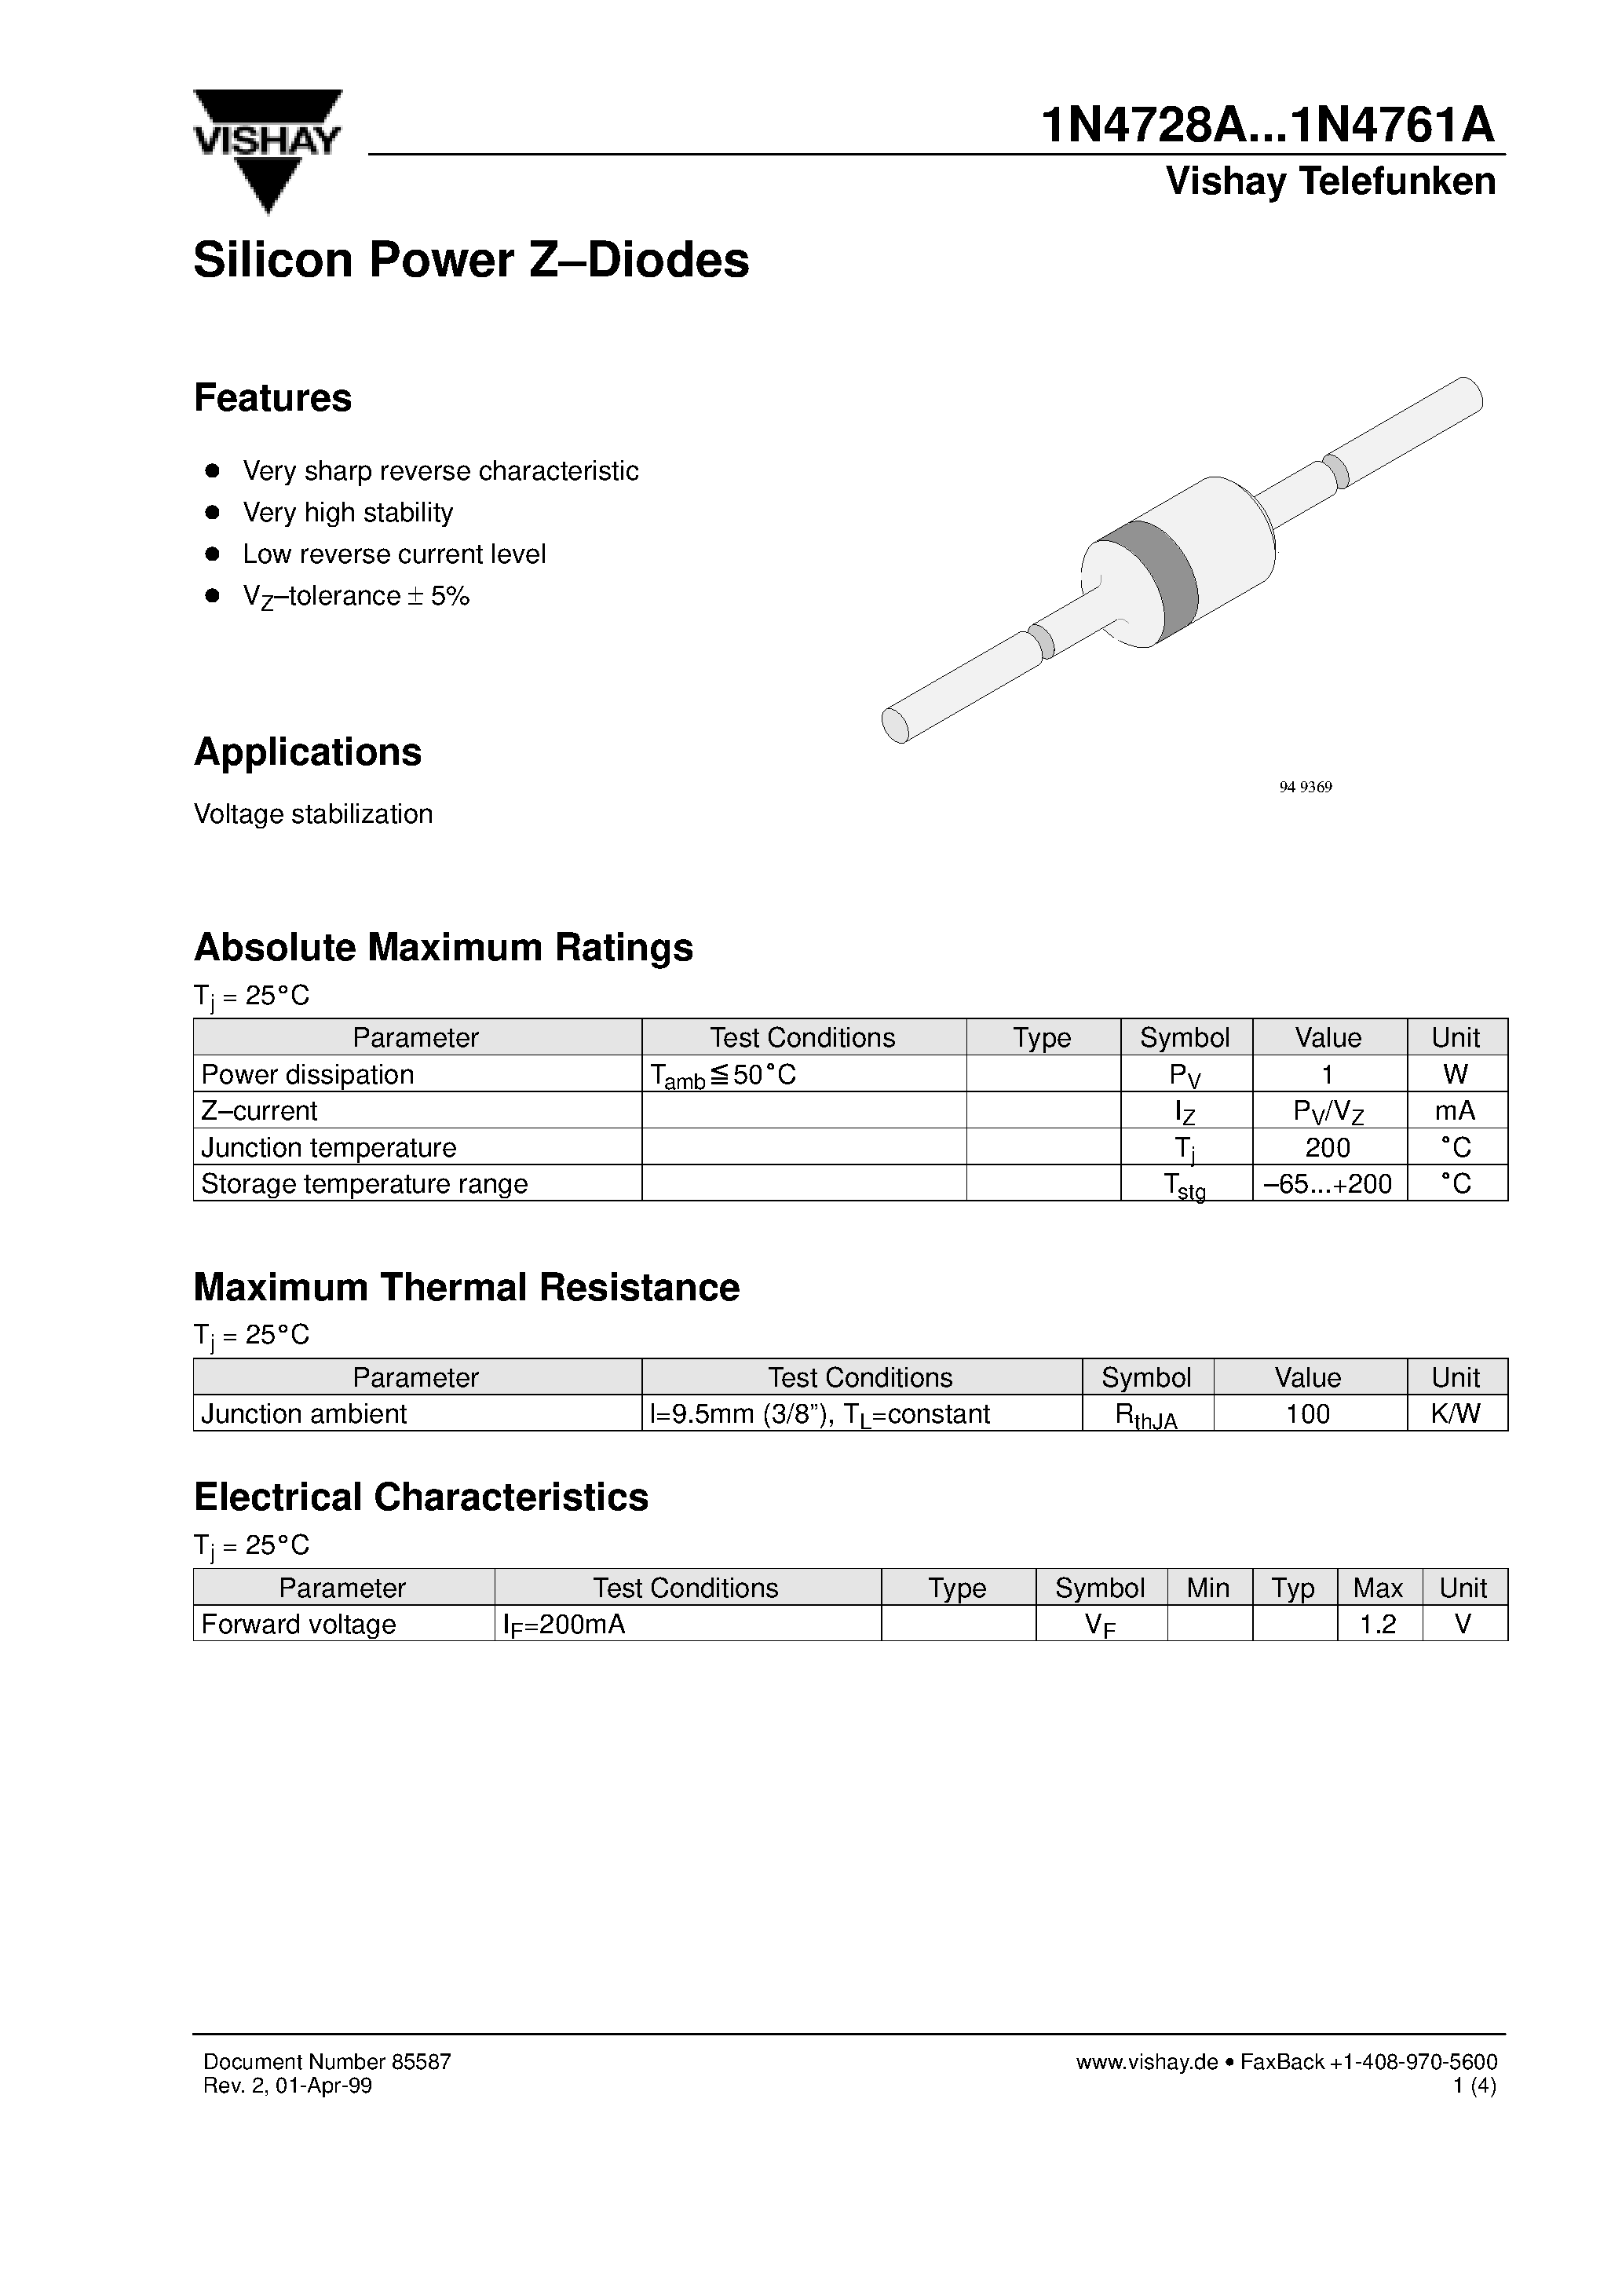 Datasheet 1N4752A - Silicon Power Z-Diodes page 1